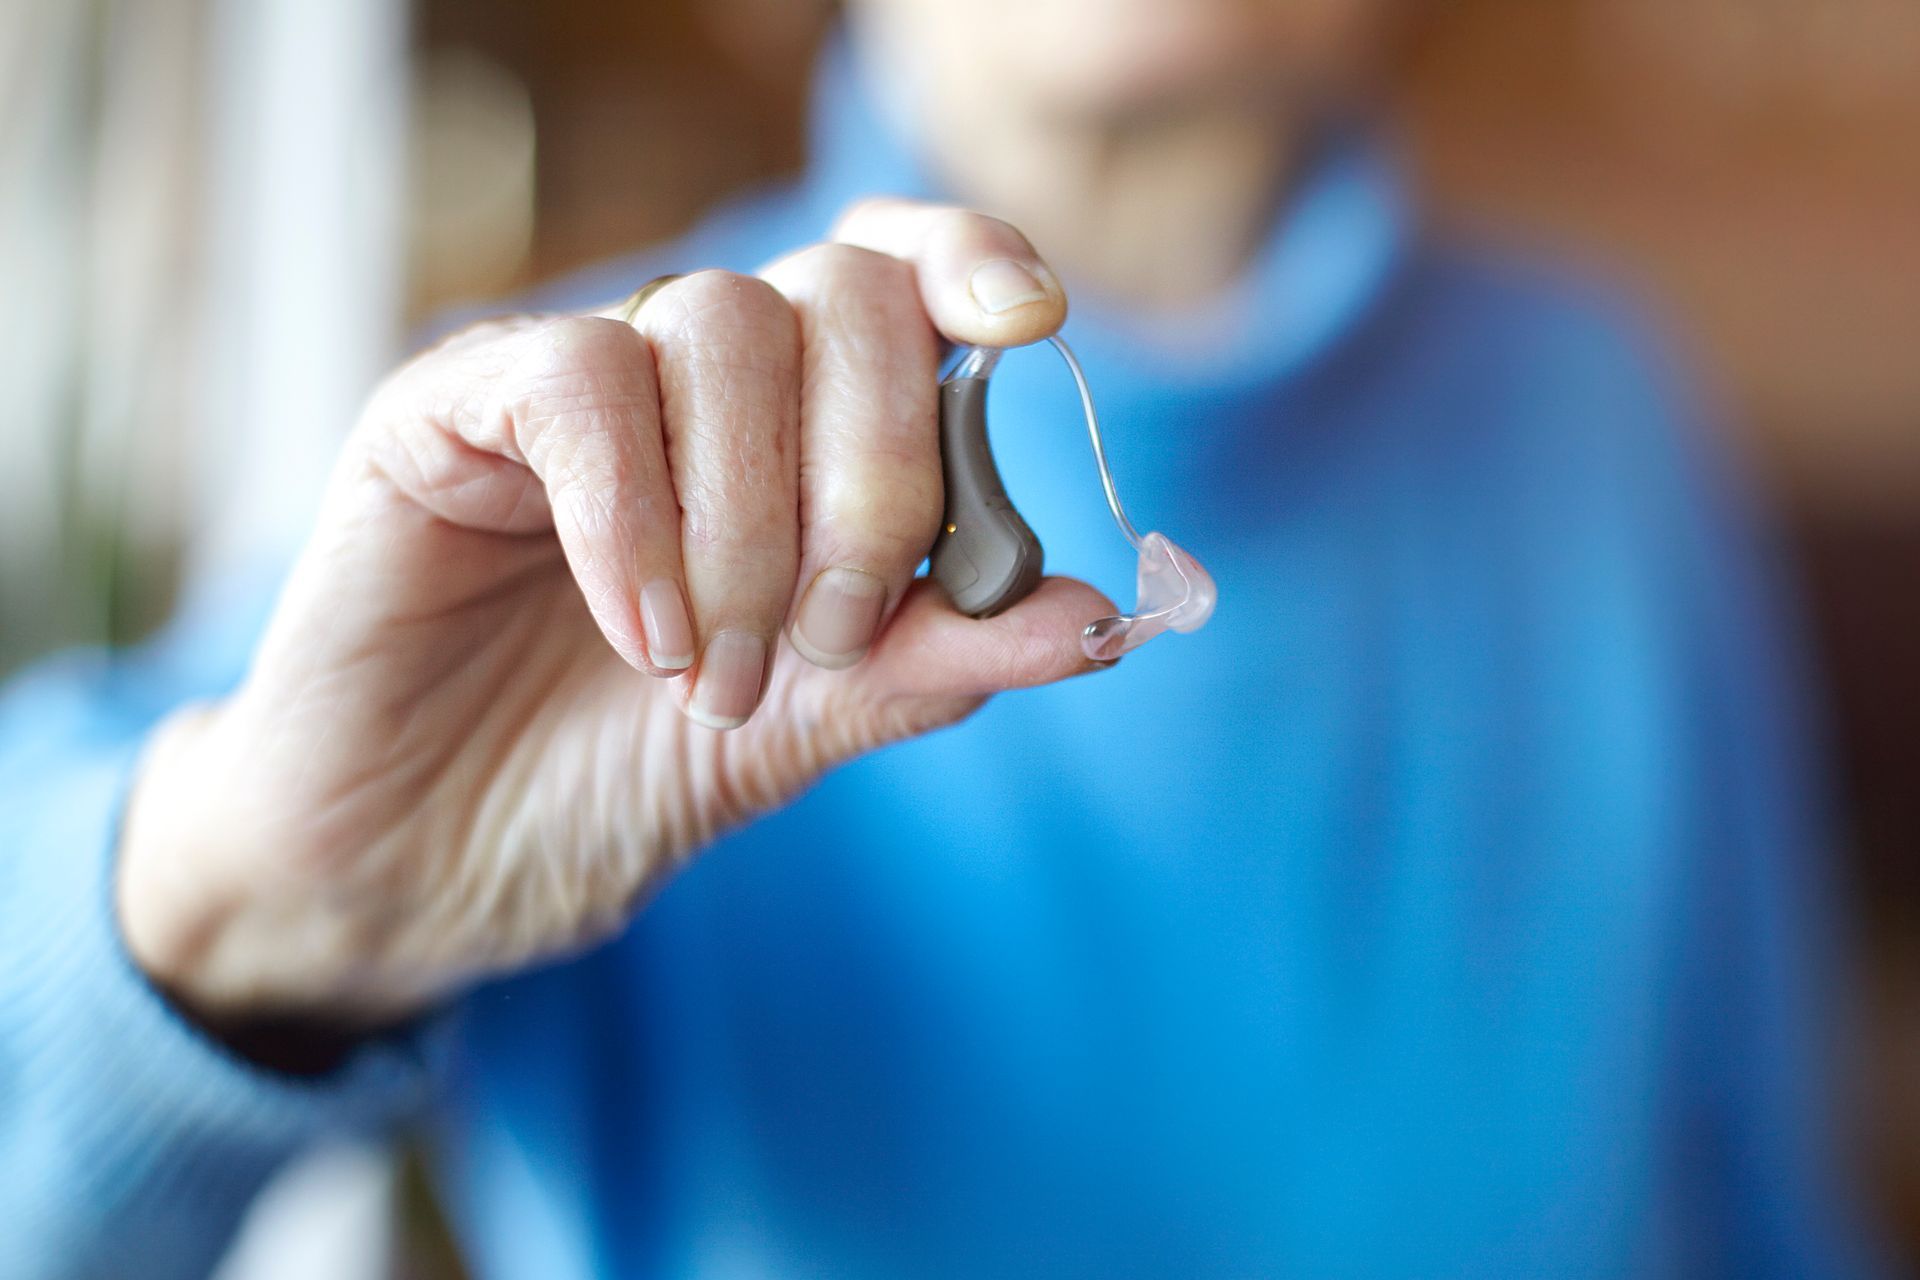 A person is holding a hearing aid in their hand.